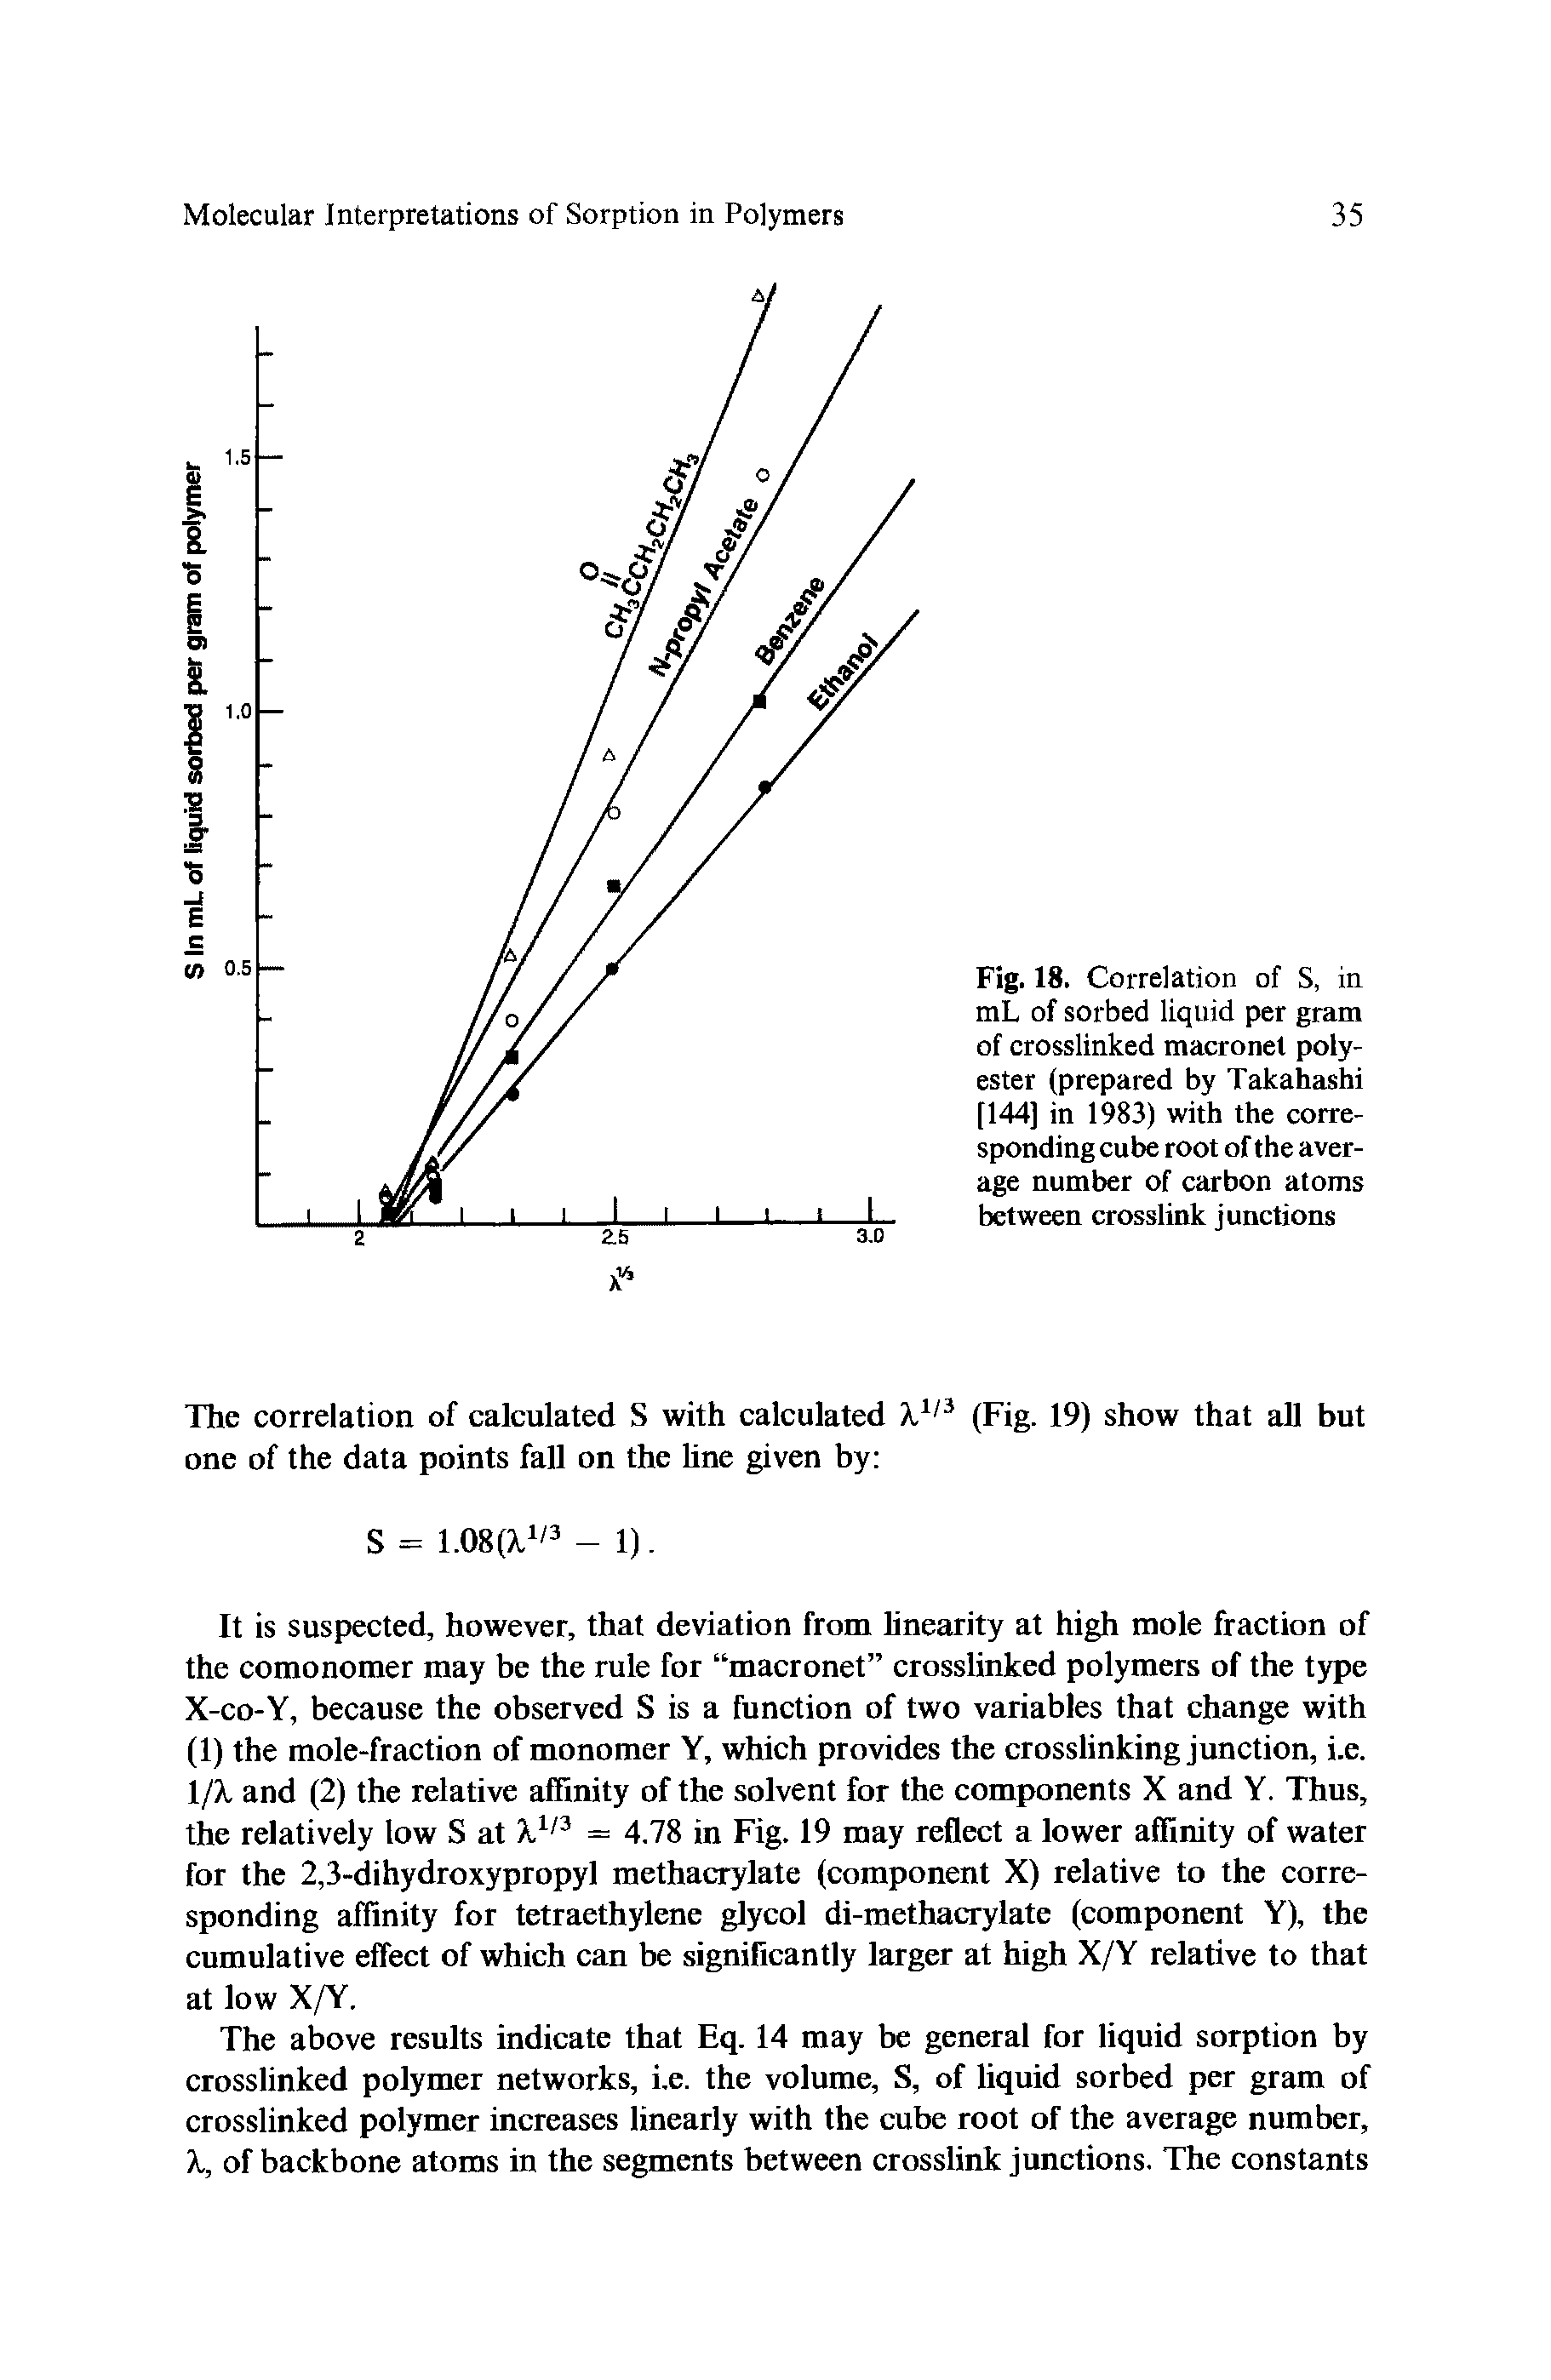 Fig. 18. Correlation of S, in mL of sorbed liquid per gram of crosslinked macronet polyester (prepared by Takahashi [144] in 1983) with the corresponding cube root of the average number of carbon atoms between crosslink junctions...